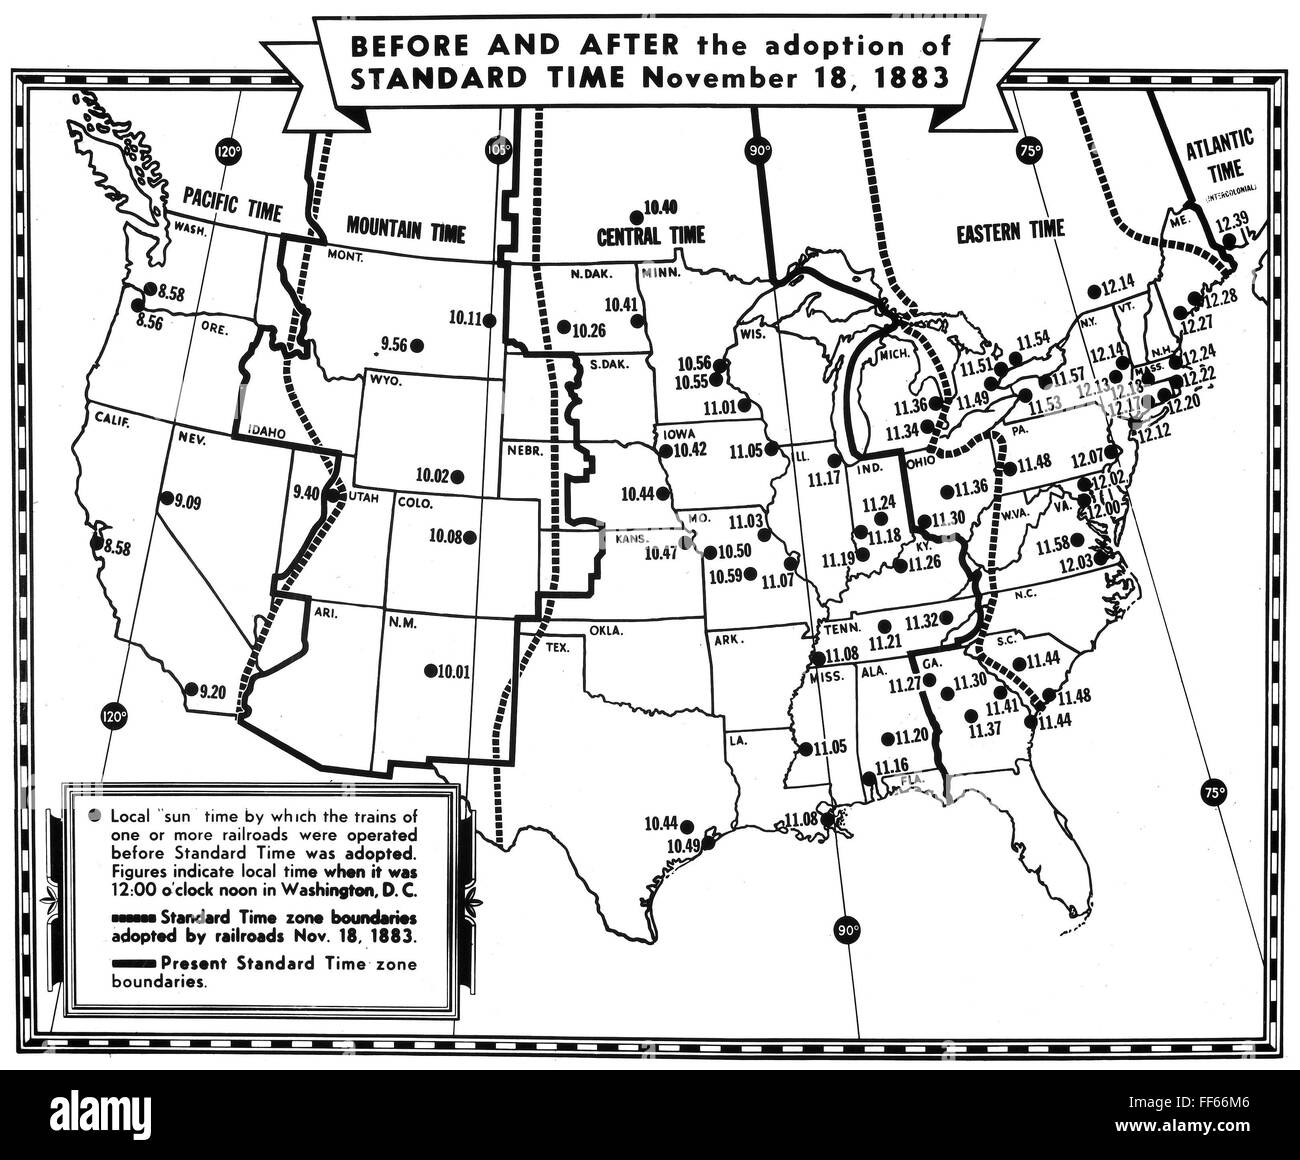 Albums 98+ Images time zone map usa black and white Sharp